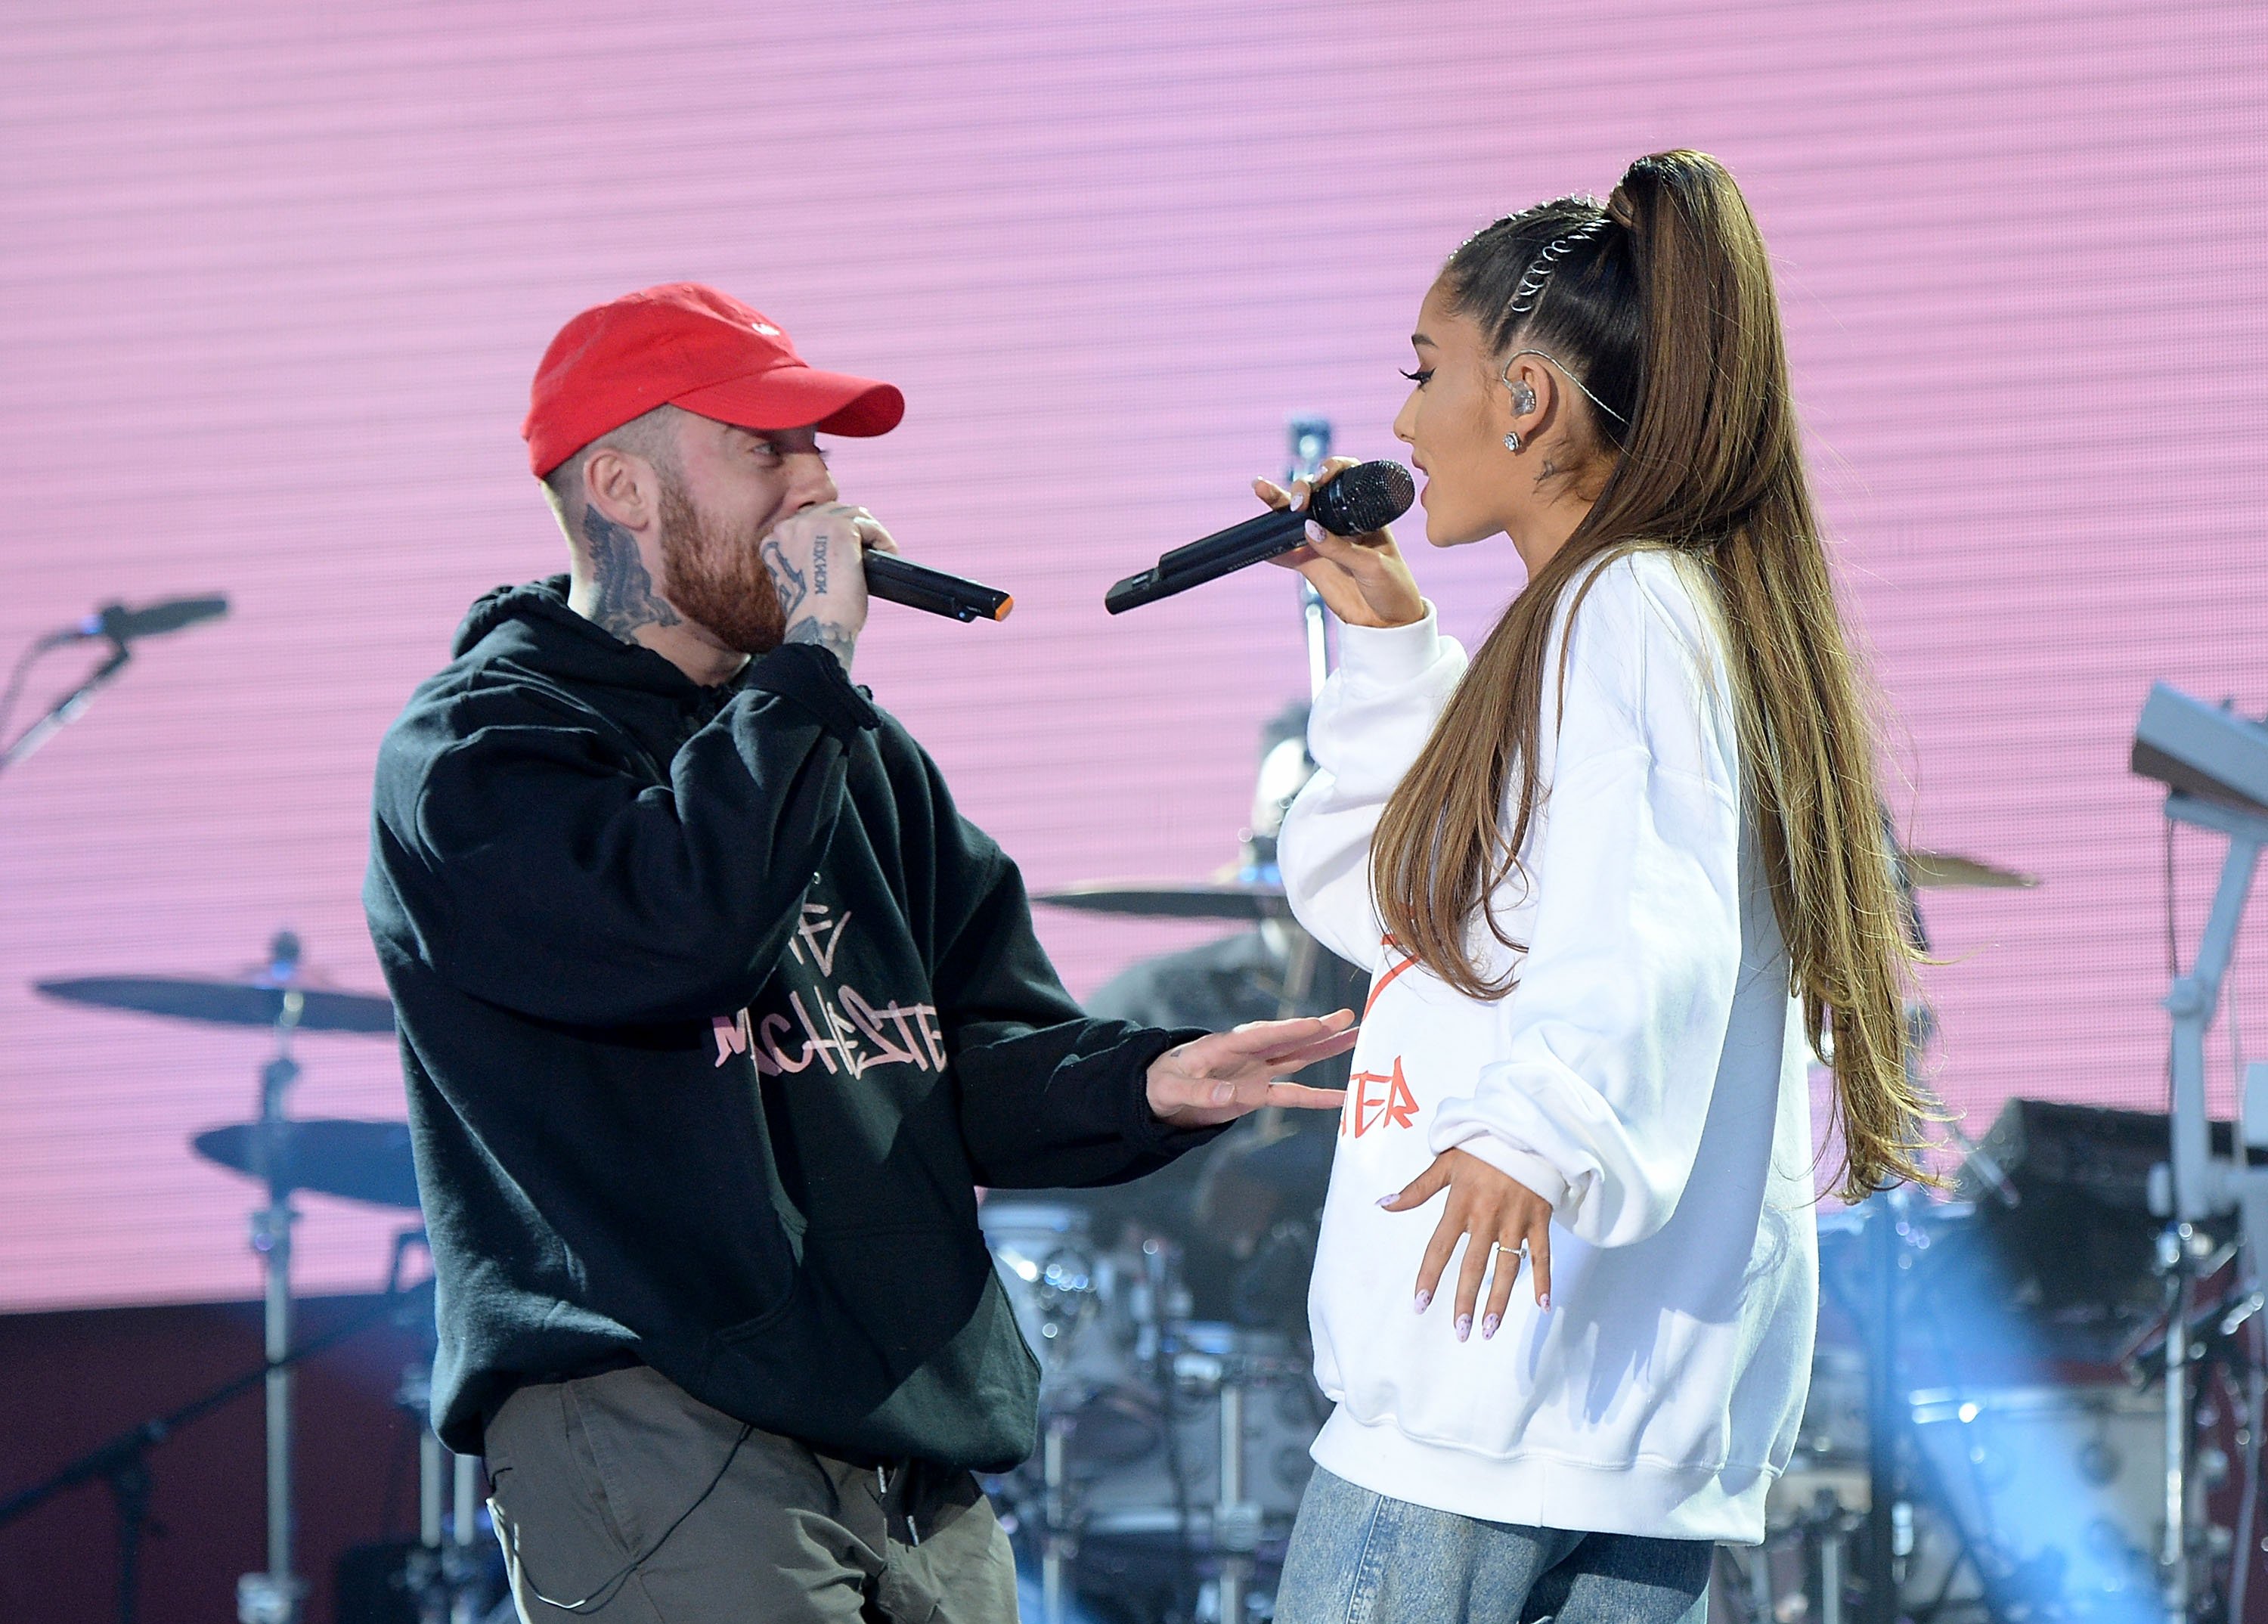 Mac Miller (L) and Ariana Grande perform on stage during the One Love Manchester Benefit Concert on June 4, 2017